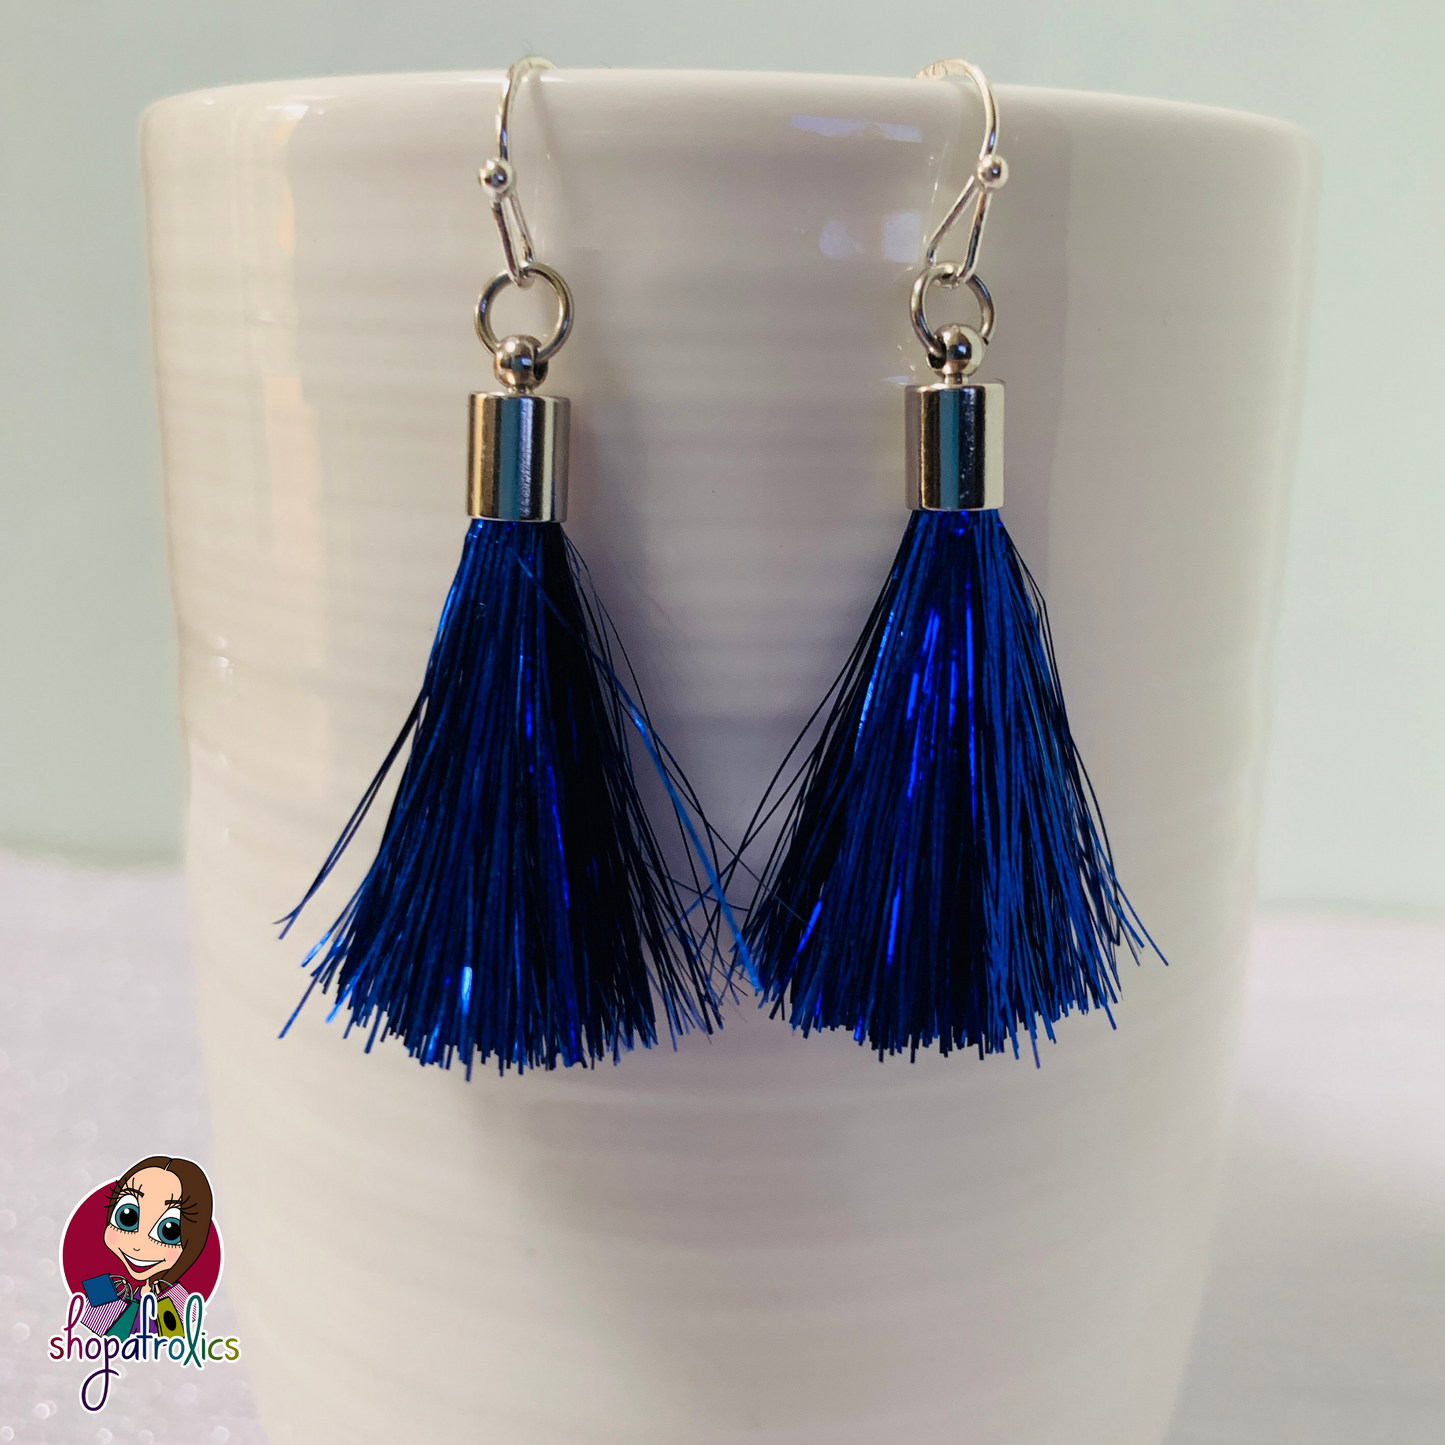 Blue and silver tinsel tassel earrings